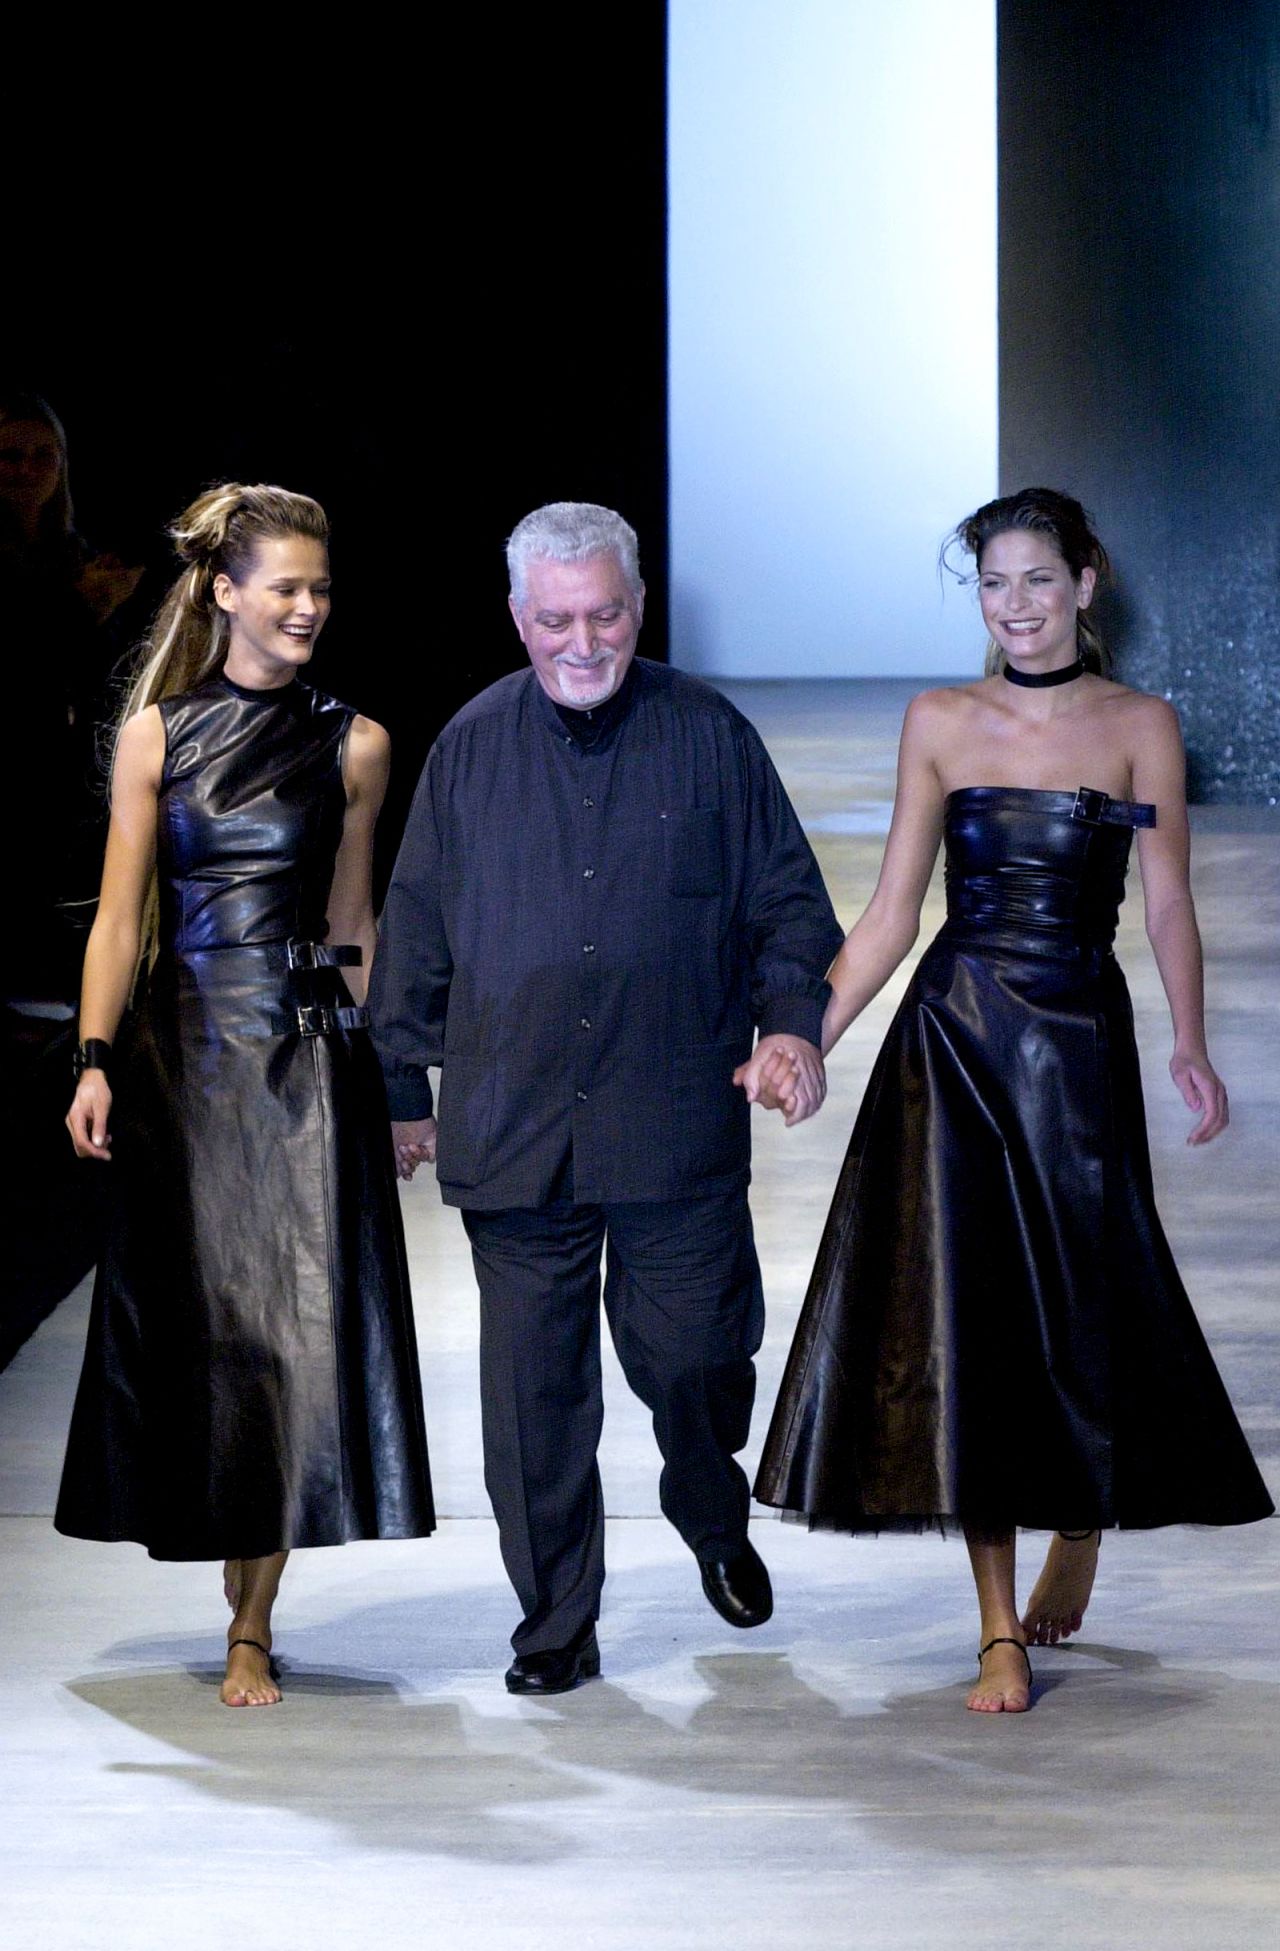 Paco Rabanne with models Carmen Kass and Mini Anden at Paris Fashion Week in 2000.